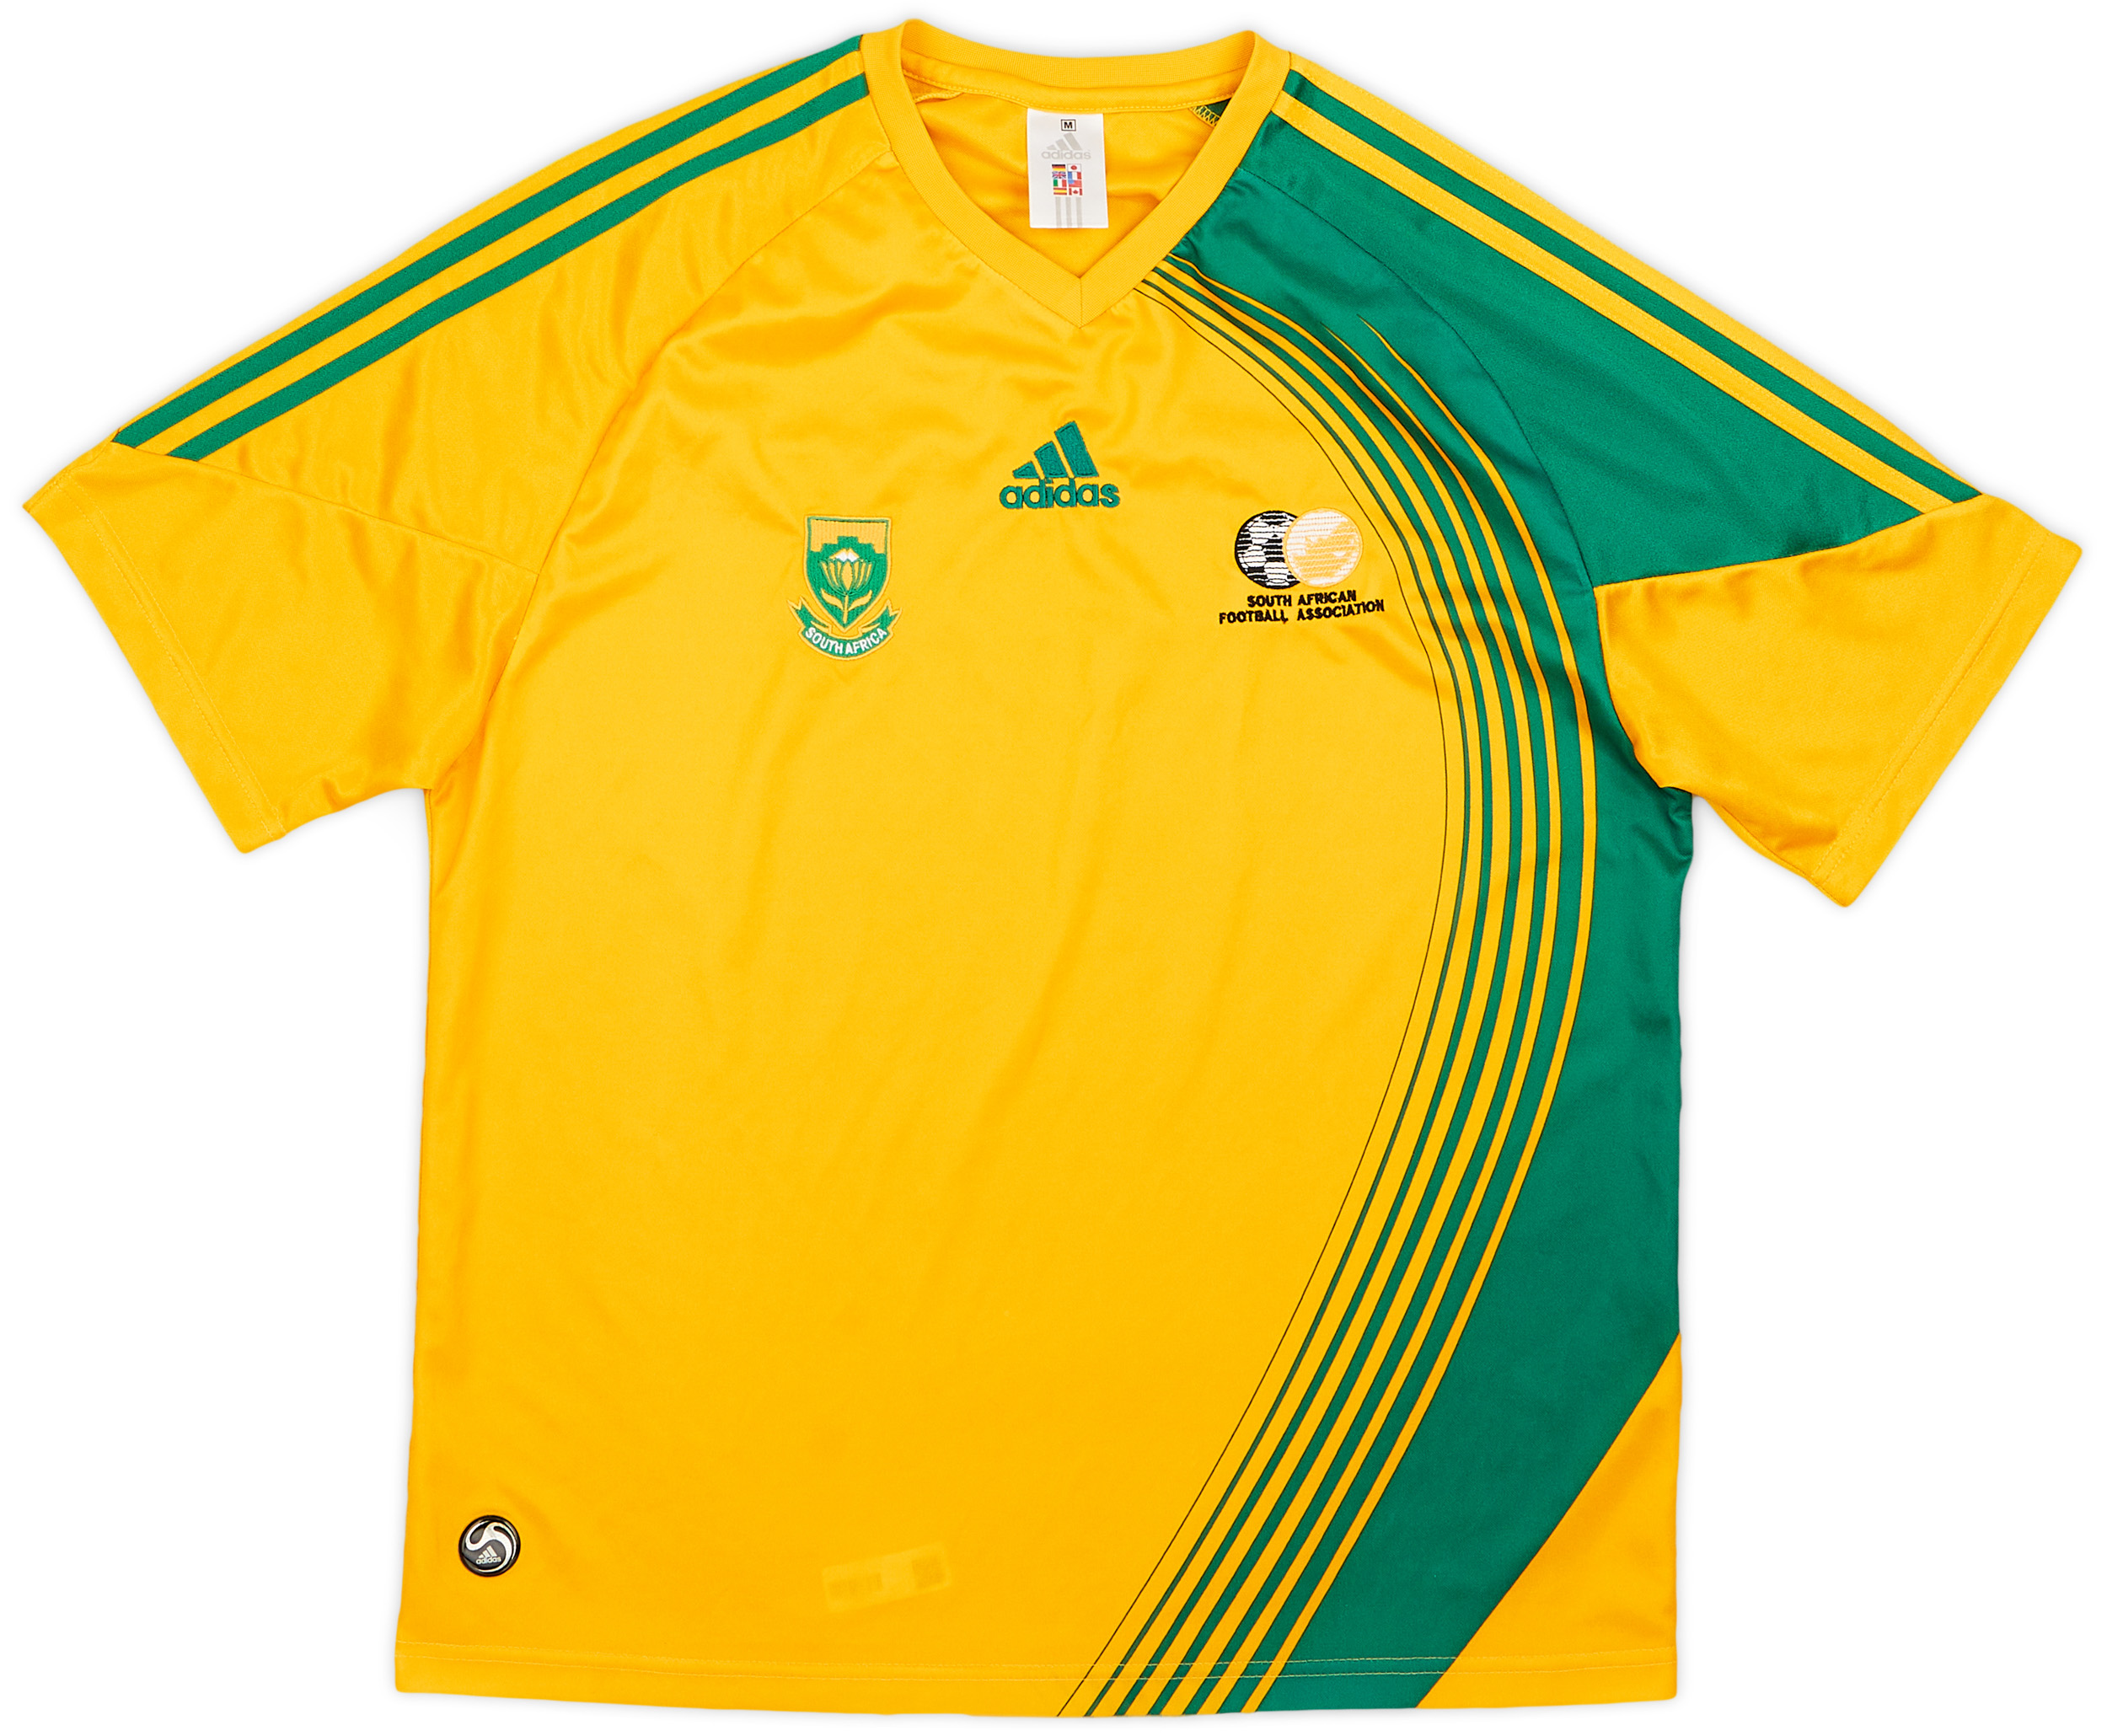 2009-10 South Africa Home Shirt - 9/10 - ()